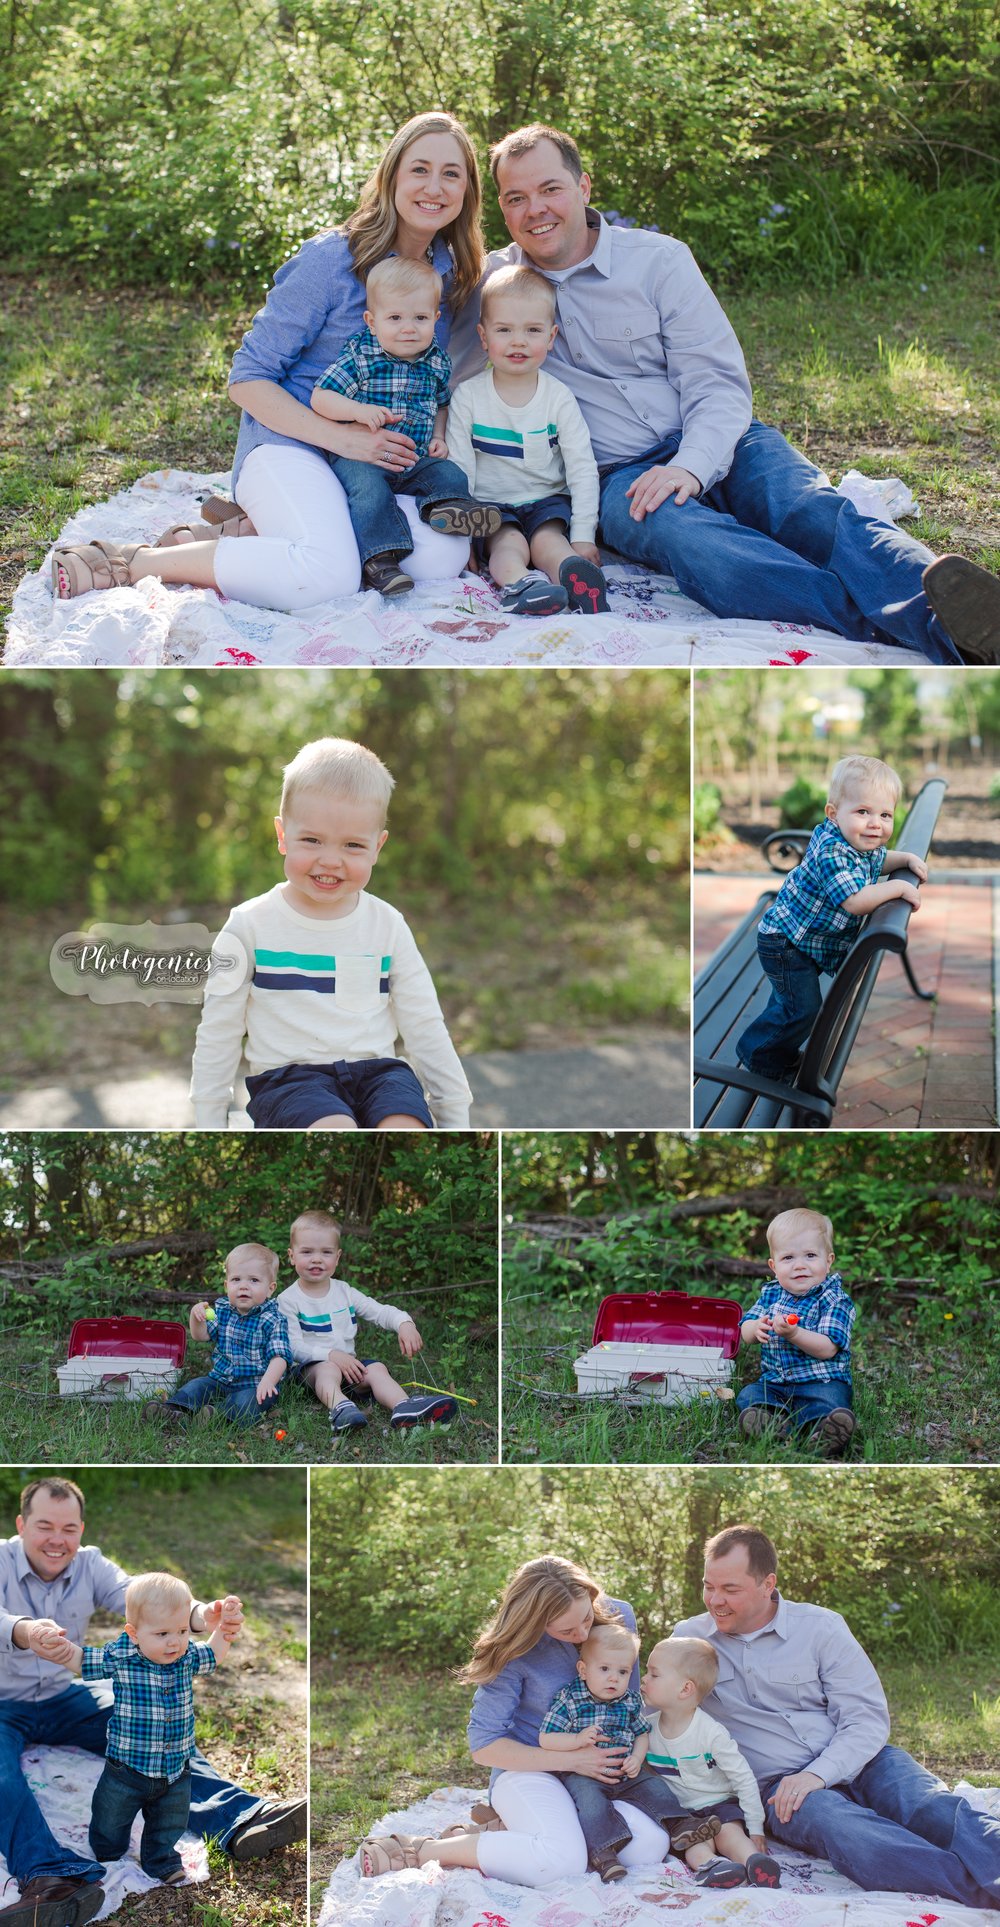  spring_morning_photography_family_of_four_poses_quilt_props_baby_brothers_mom_dad_ideas_photography_missouri_photographer 3 